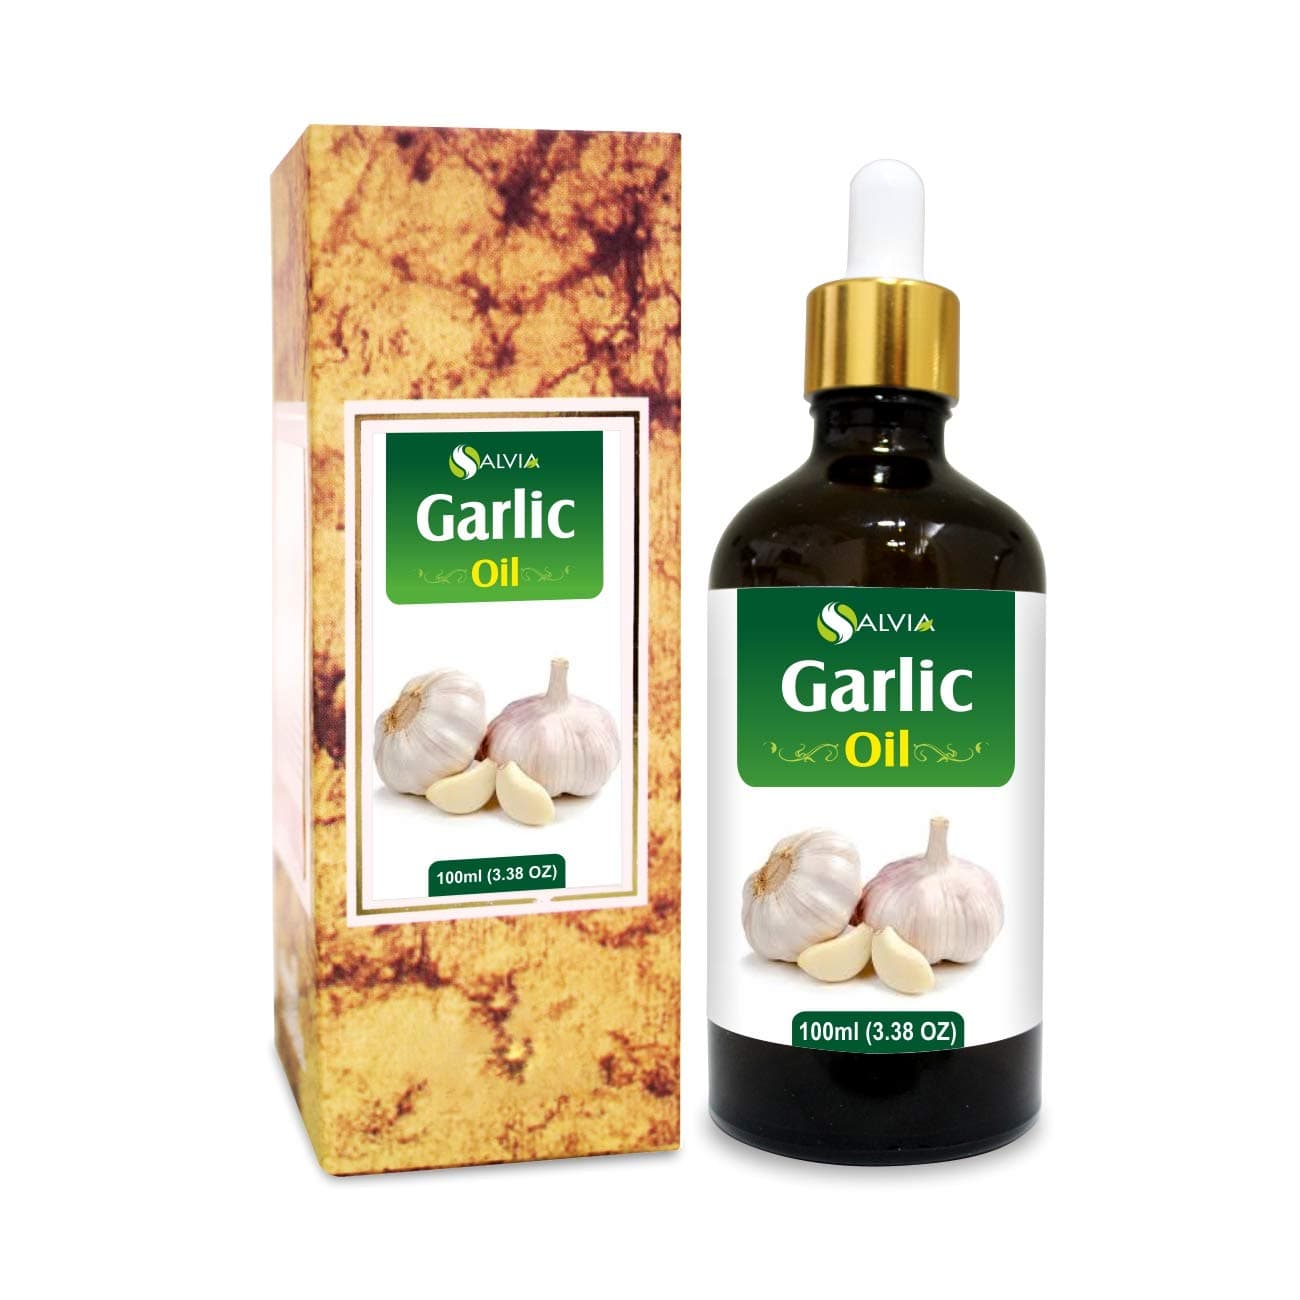 Salvia Natural Essential Oils Garlic Oil (Allium Sativum) 100% Natural Pure Essential Oil Solves Fungal Infection, Improves Immunity, Diminishes Blemishes & Acne Marks, Promotes Hair Growth